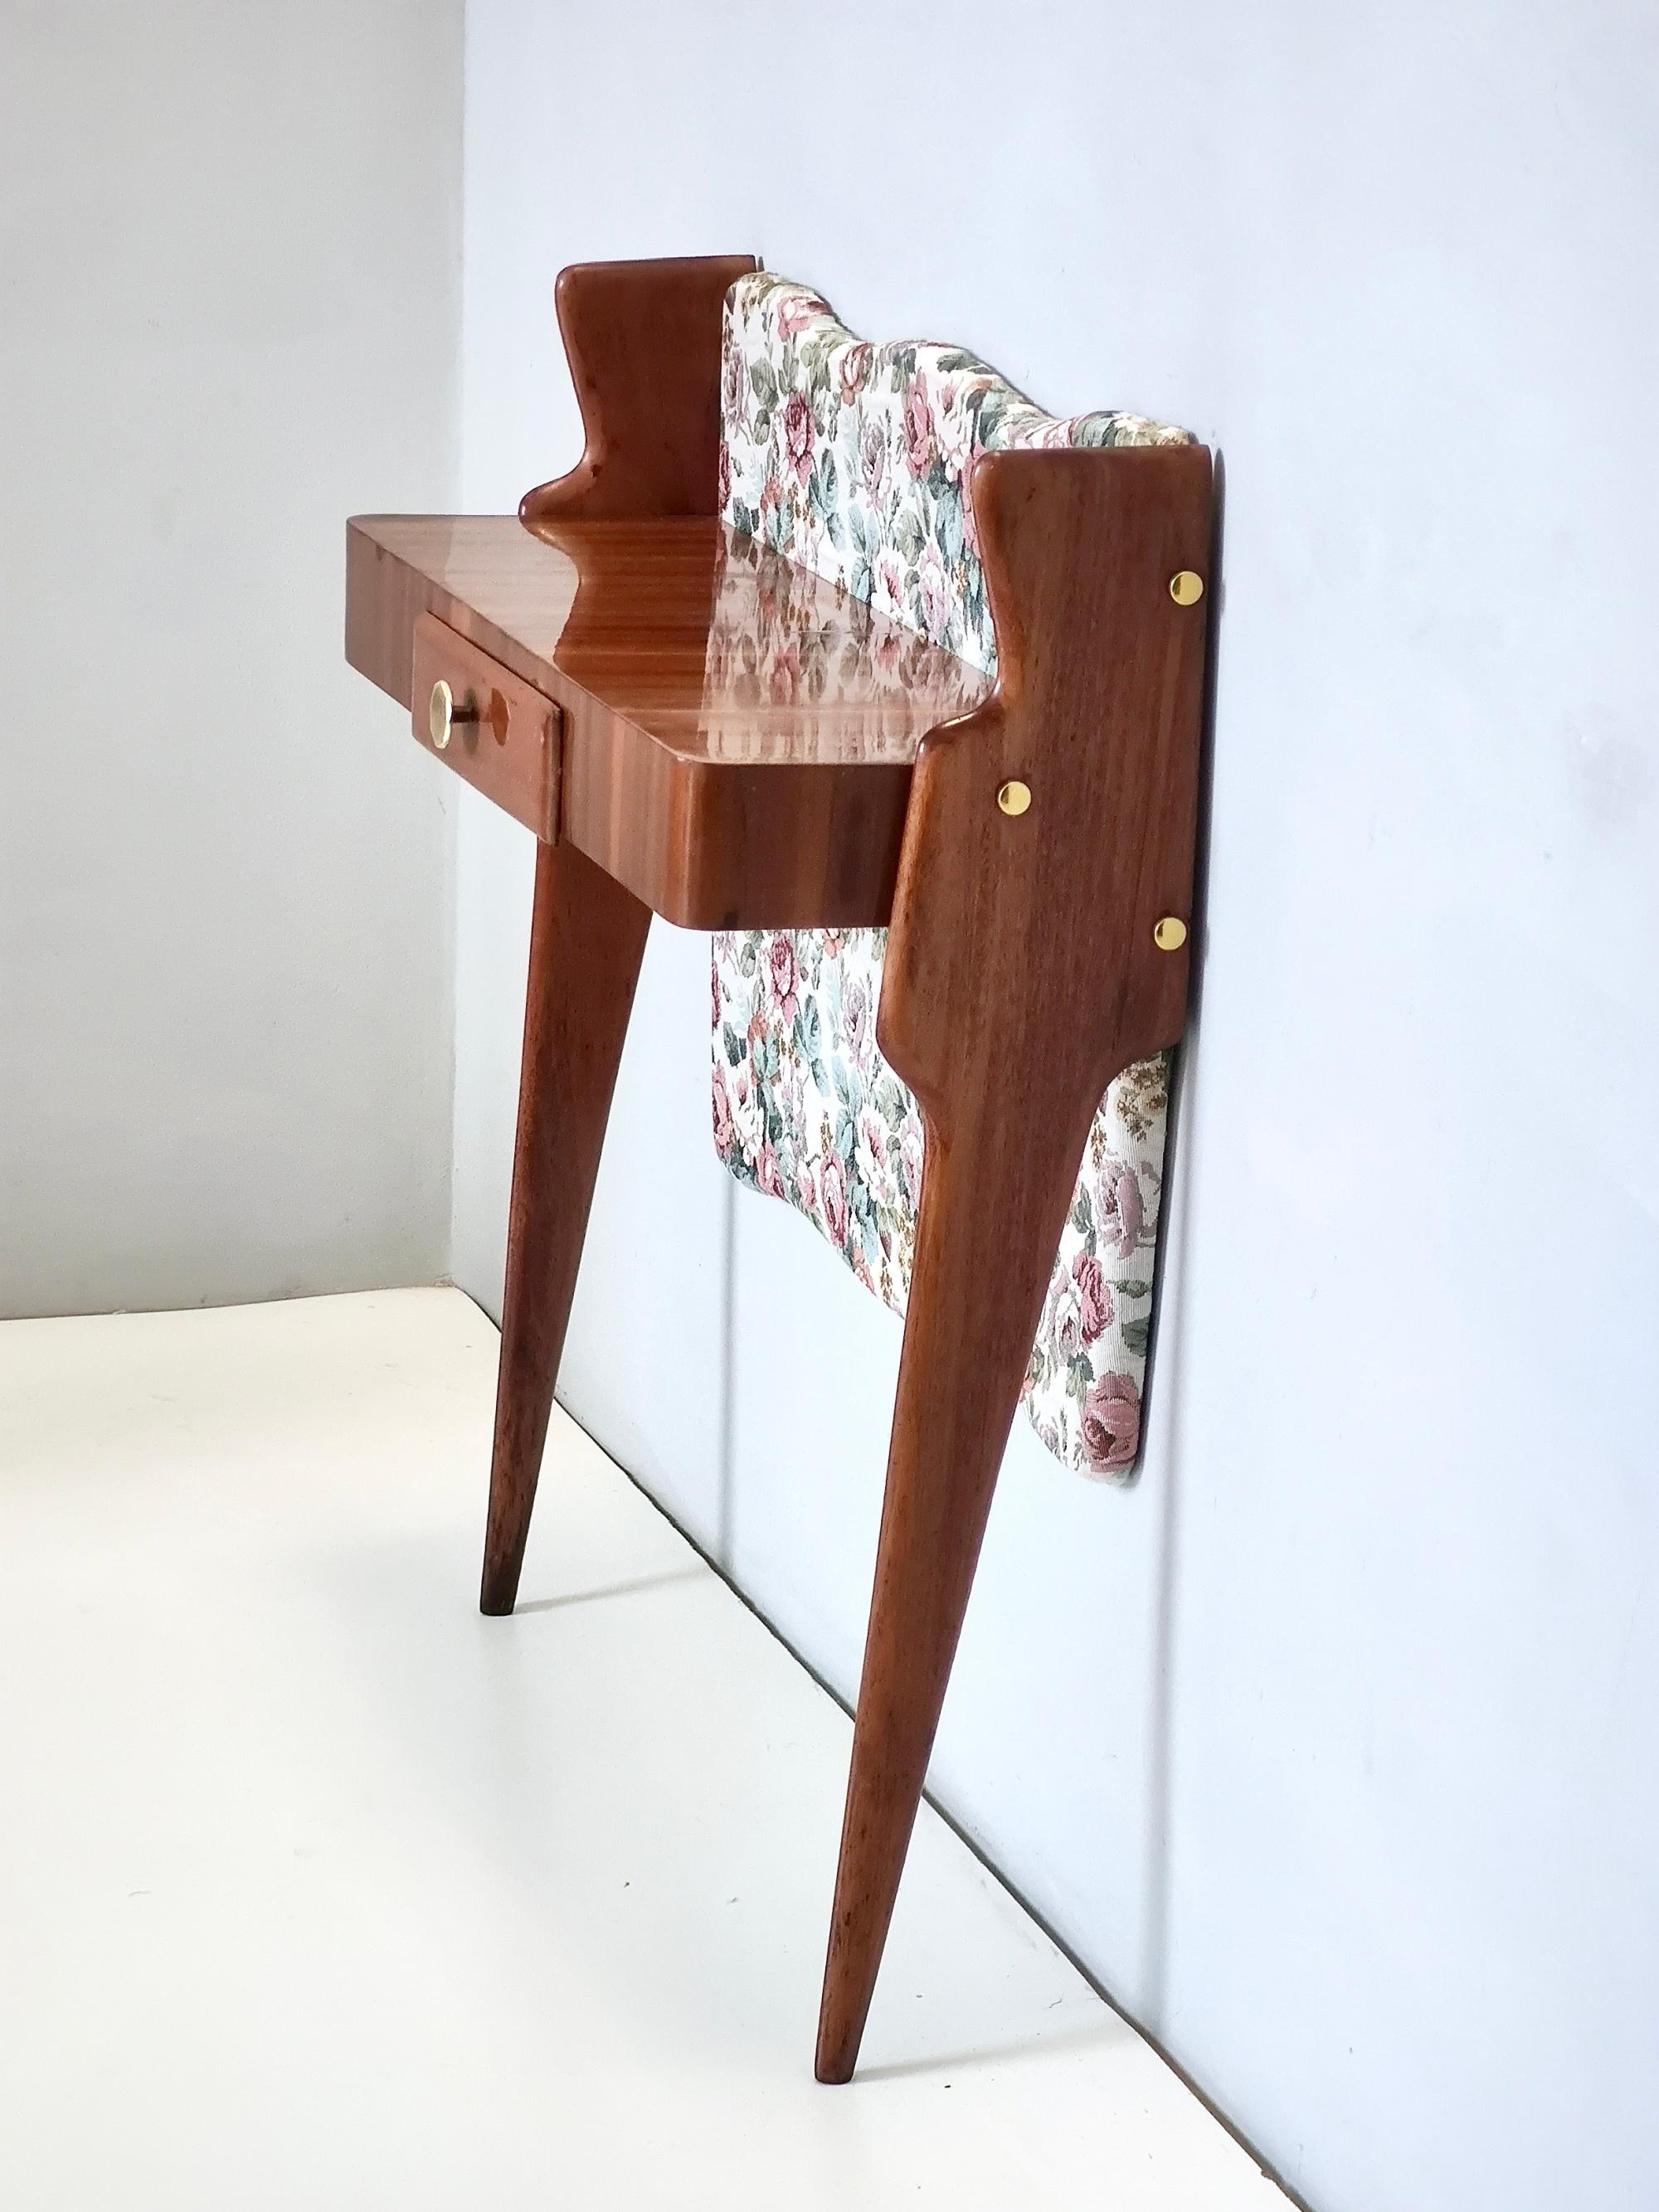 Mid-20th Century Vintage Ebonized Beech and Rose-Patterned Fabric Console with a Drawer, Italy For Sale